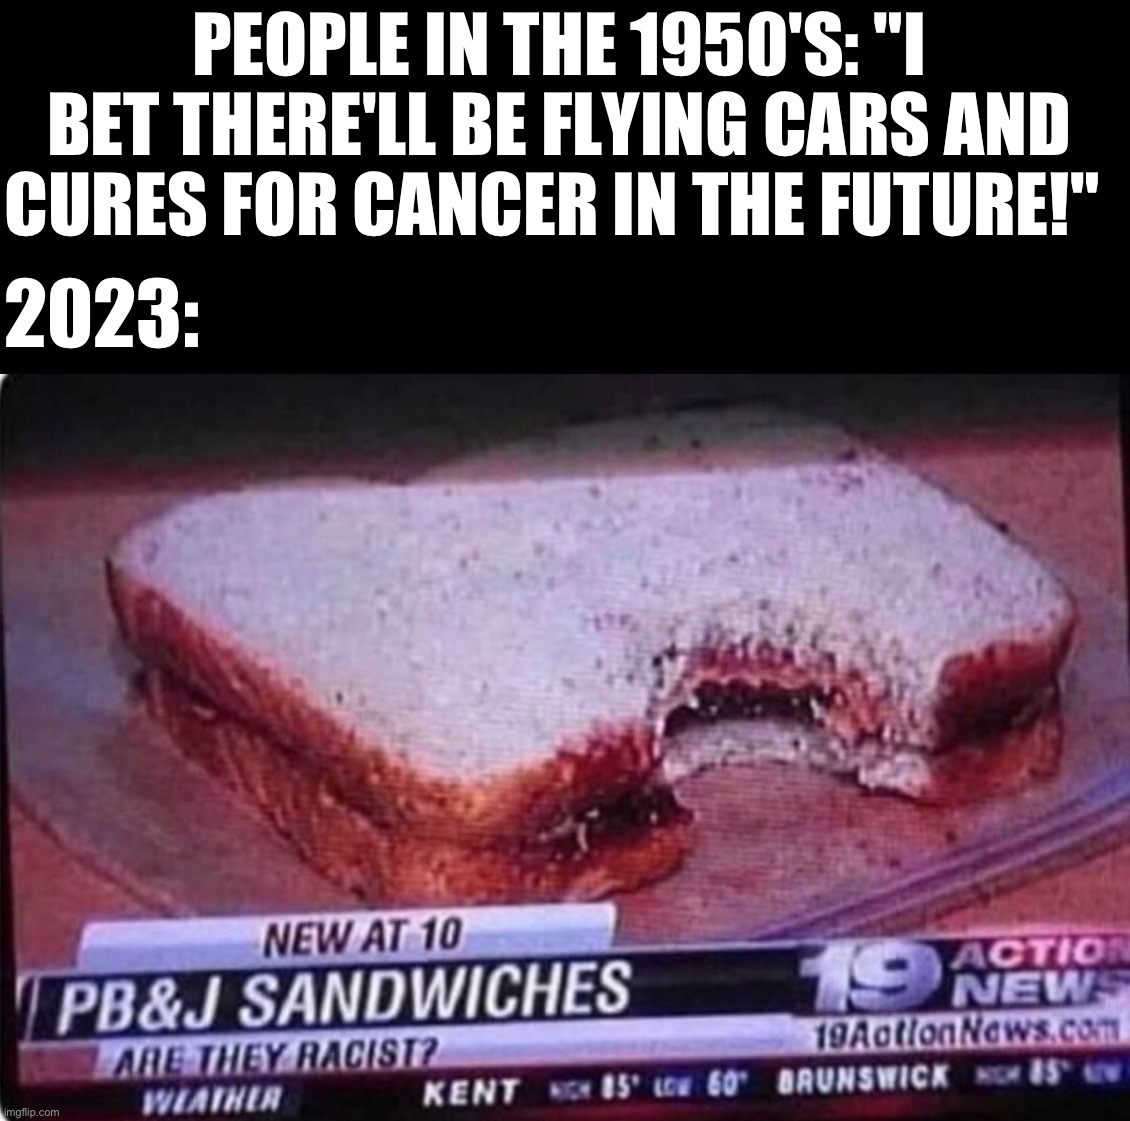 real eye roll moment | PEOPLE IN THE 1950'S: "I BET THERE'LL BE FLYING CARS AND CURES FOR CANCER IN THE FUTURE!"; 2023: | image tagged in meme,conservatives,funny,annoying | made w/ Imgflip meme maker